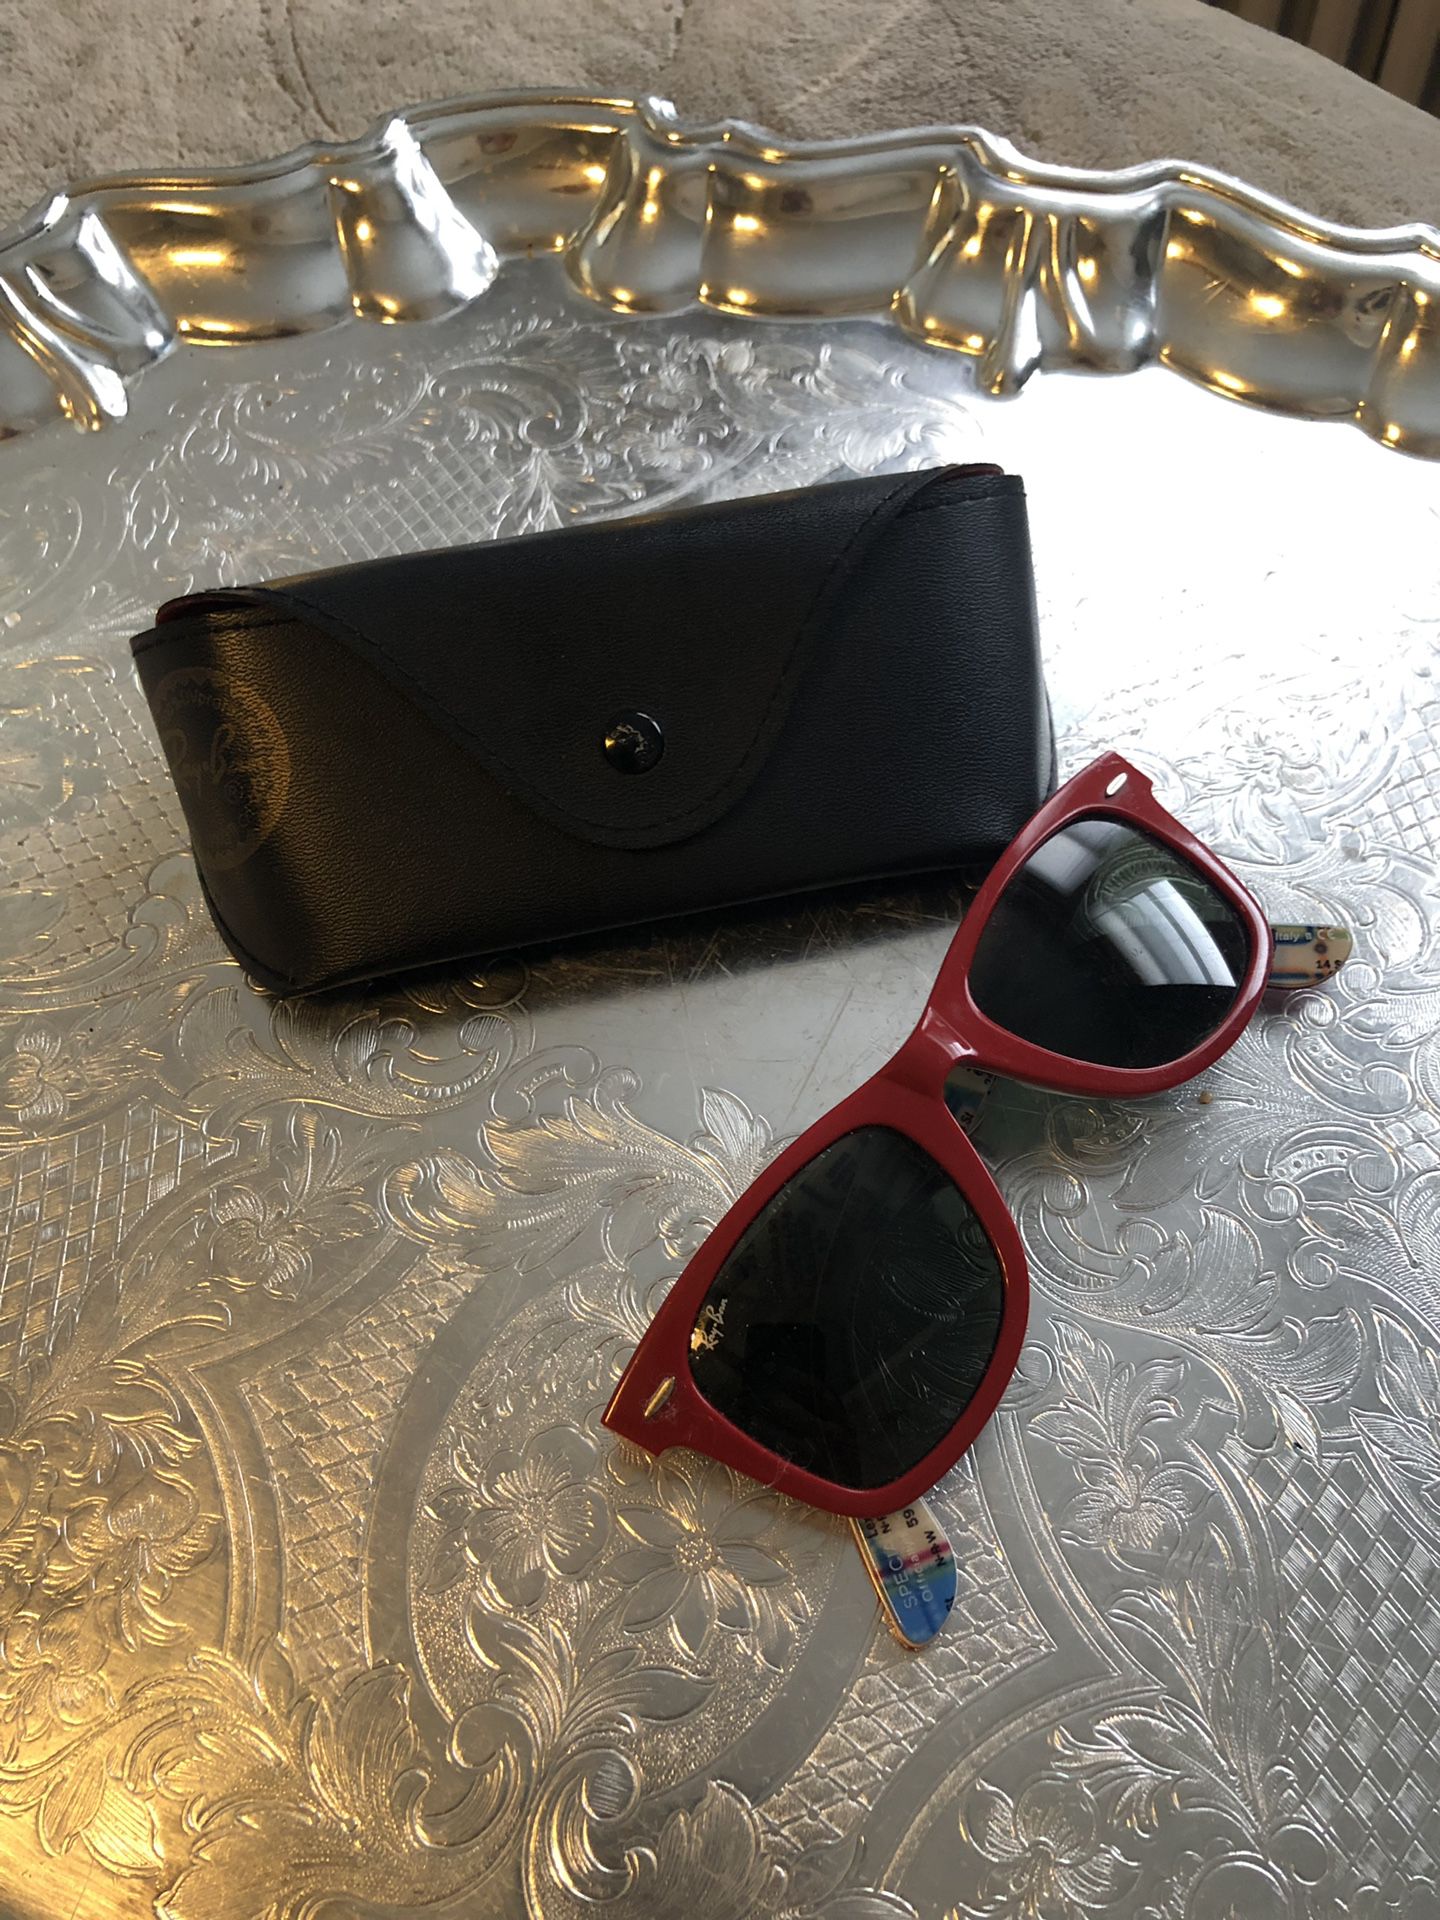 Ray Ban’s special edition NY subway sun glasses good condition. Paid $190